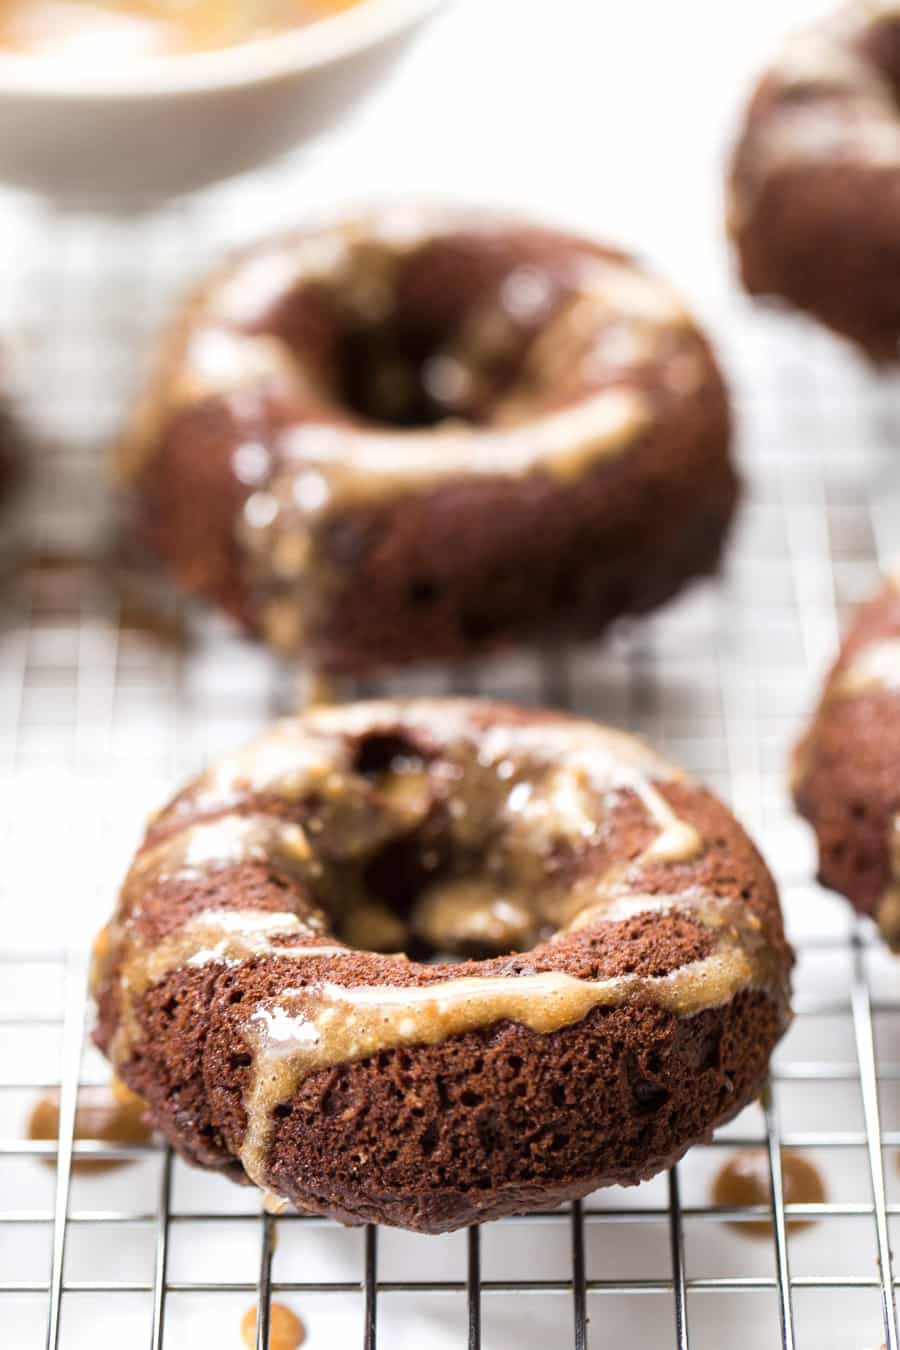 Banana Chocolate BLENDER Donuts! made with healthy ingredients, ready in just 15 minutes and seriously delicious! [vegan]